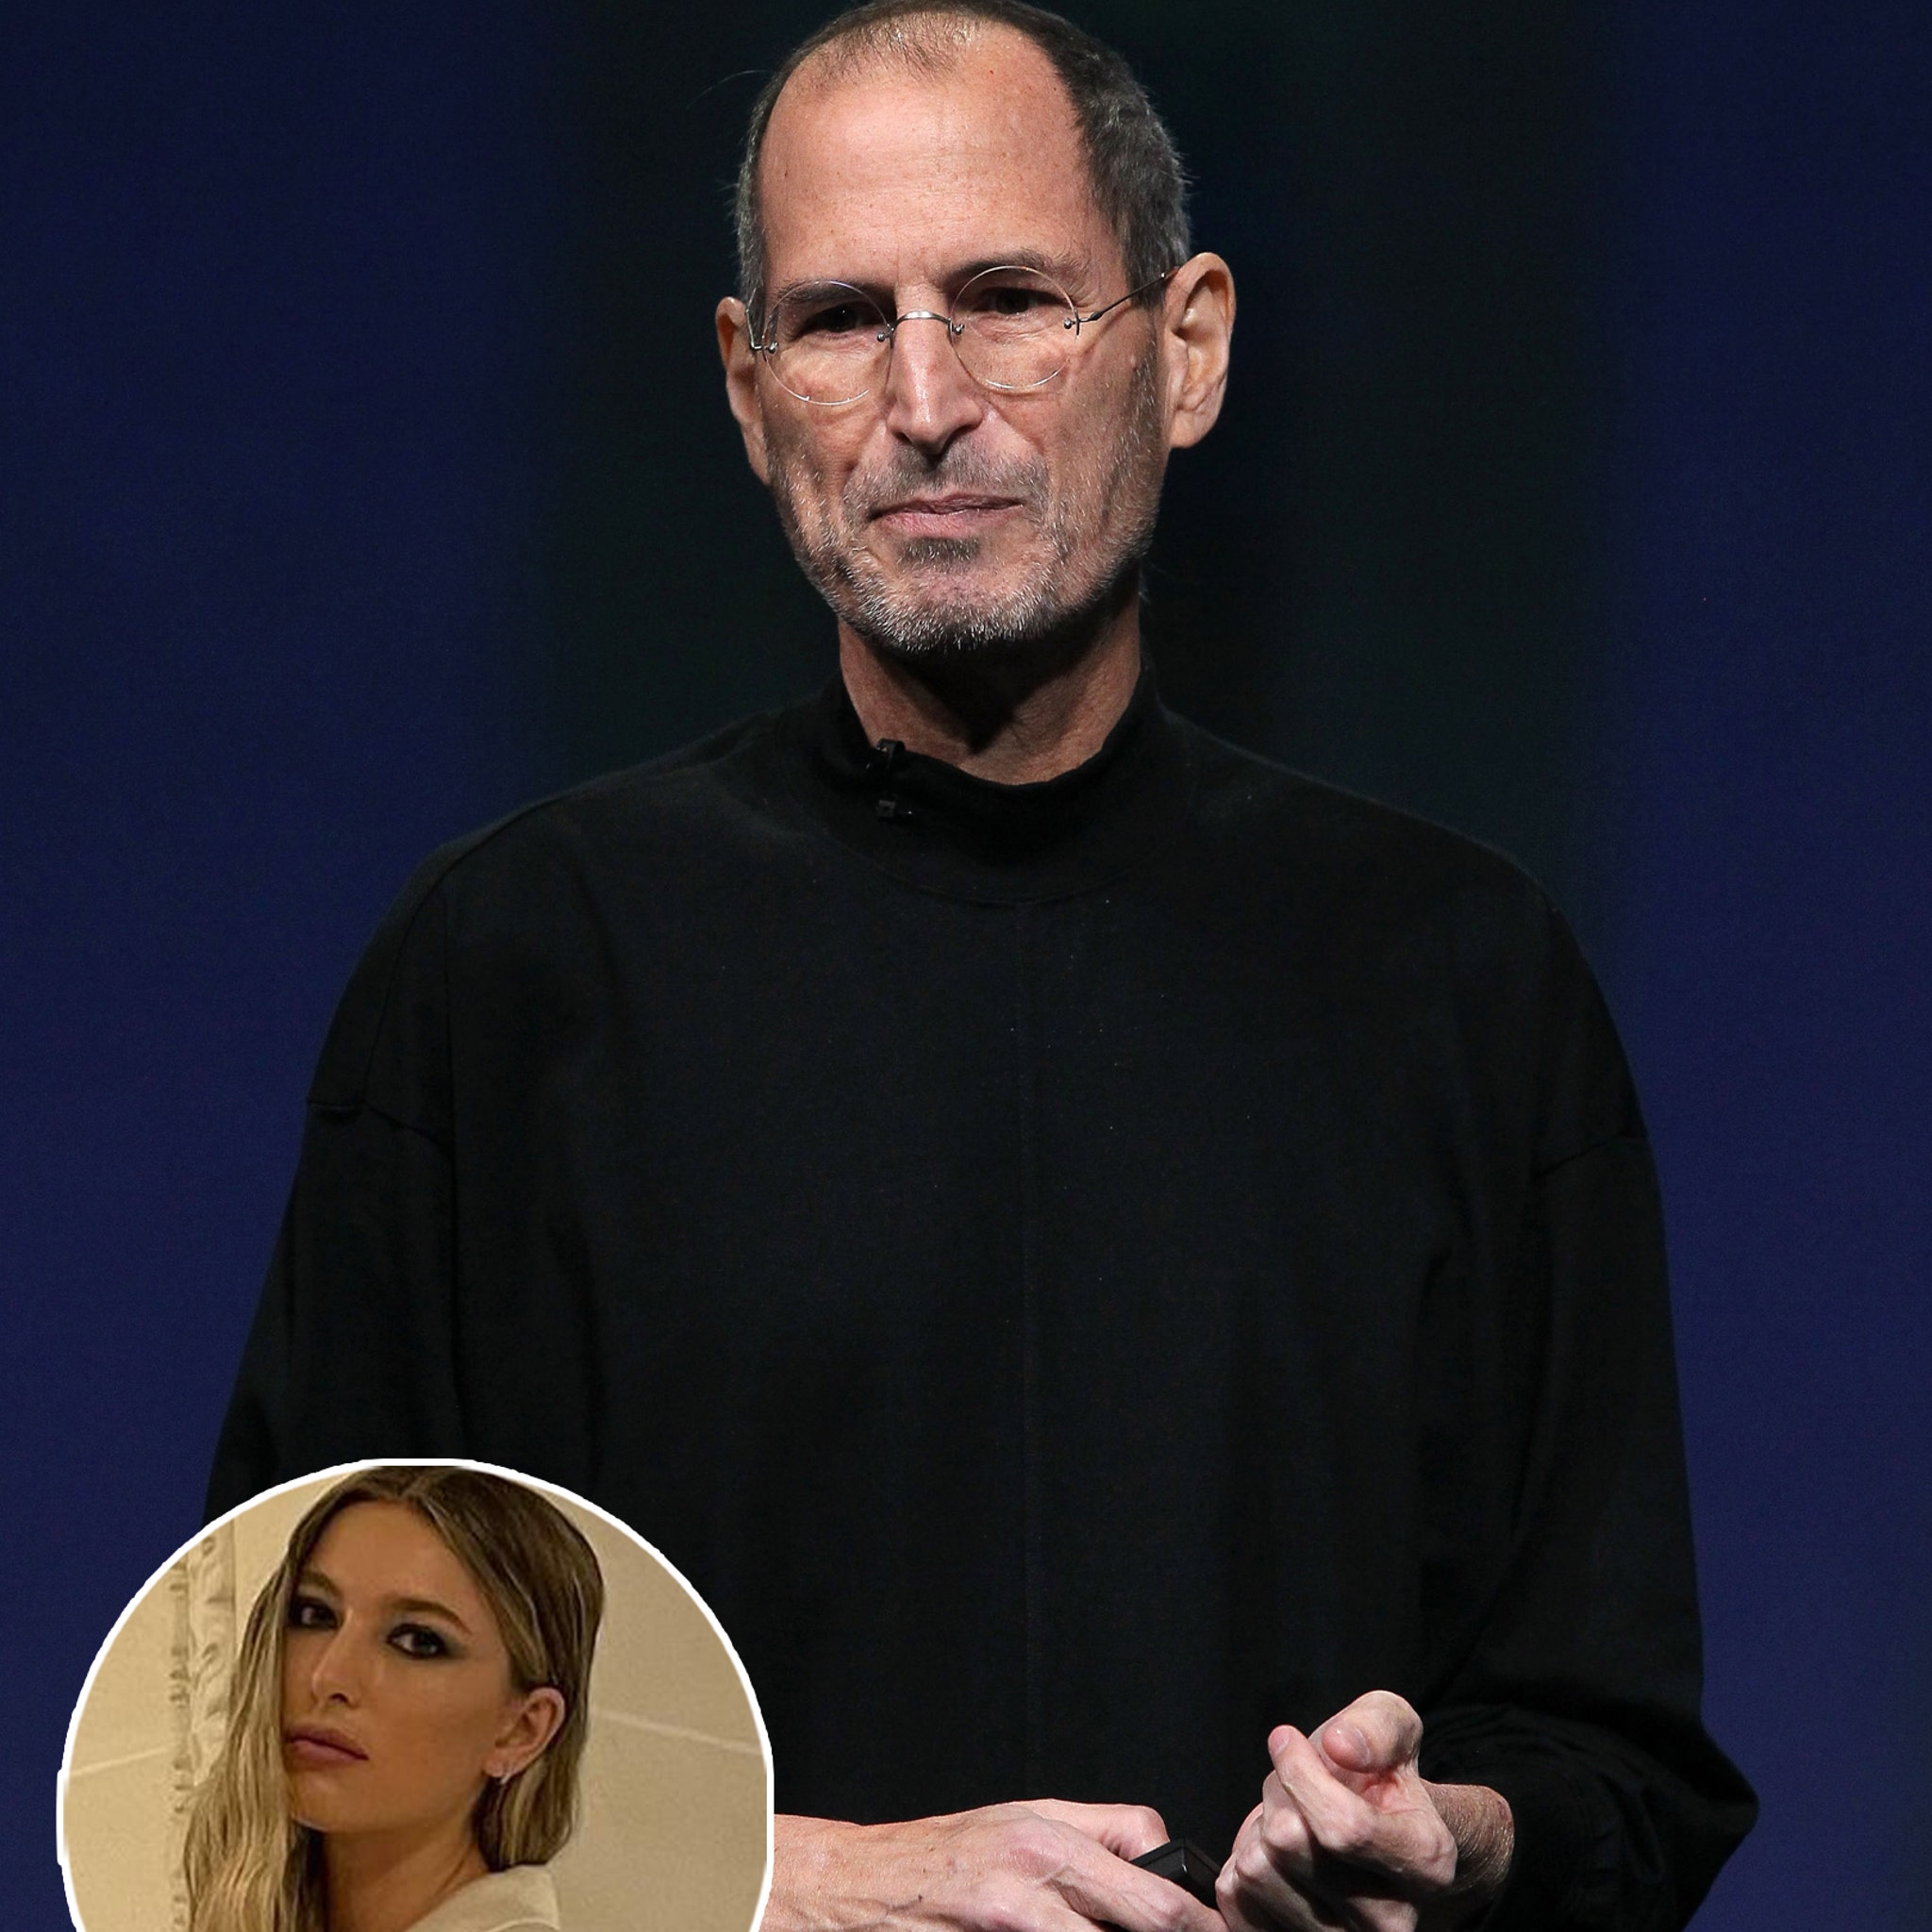 Steve Jobs's Daughter Eve Signs with DNA Modeling Agency